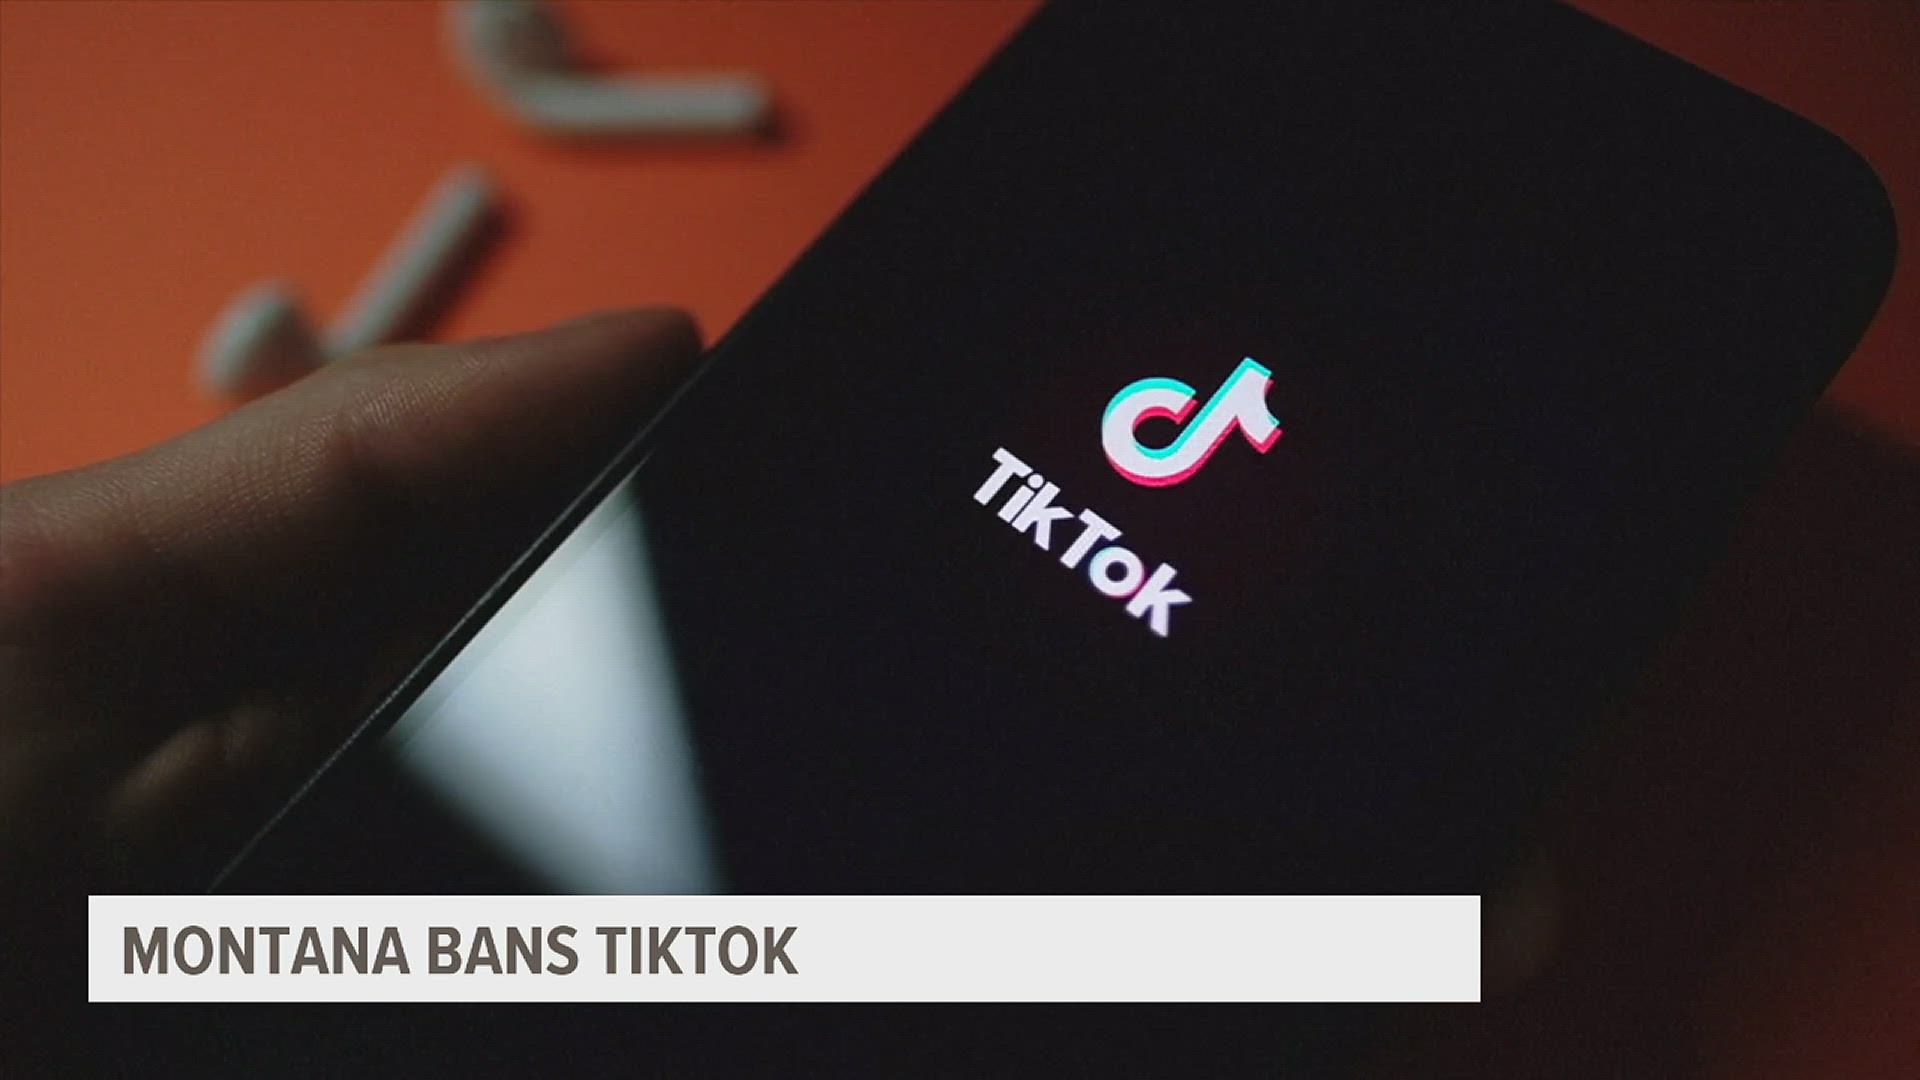 The State of Montana has banned TikTok, citing security concerns over intelligence gathering through the application. Montana becomes the first state to ban the app.